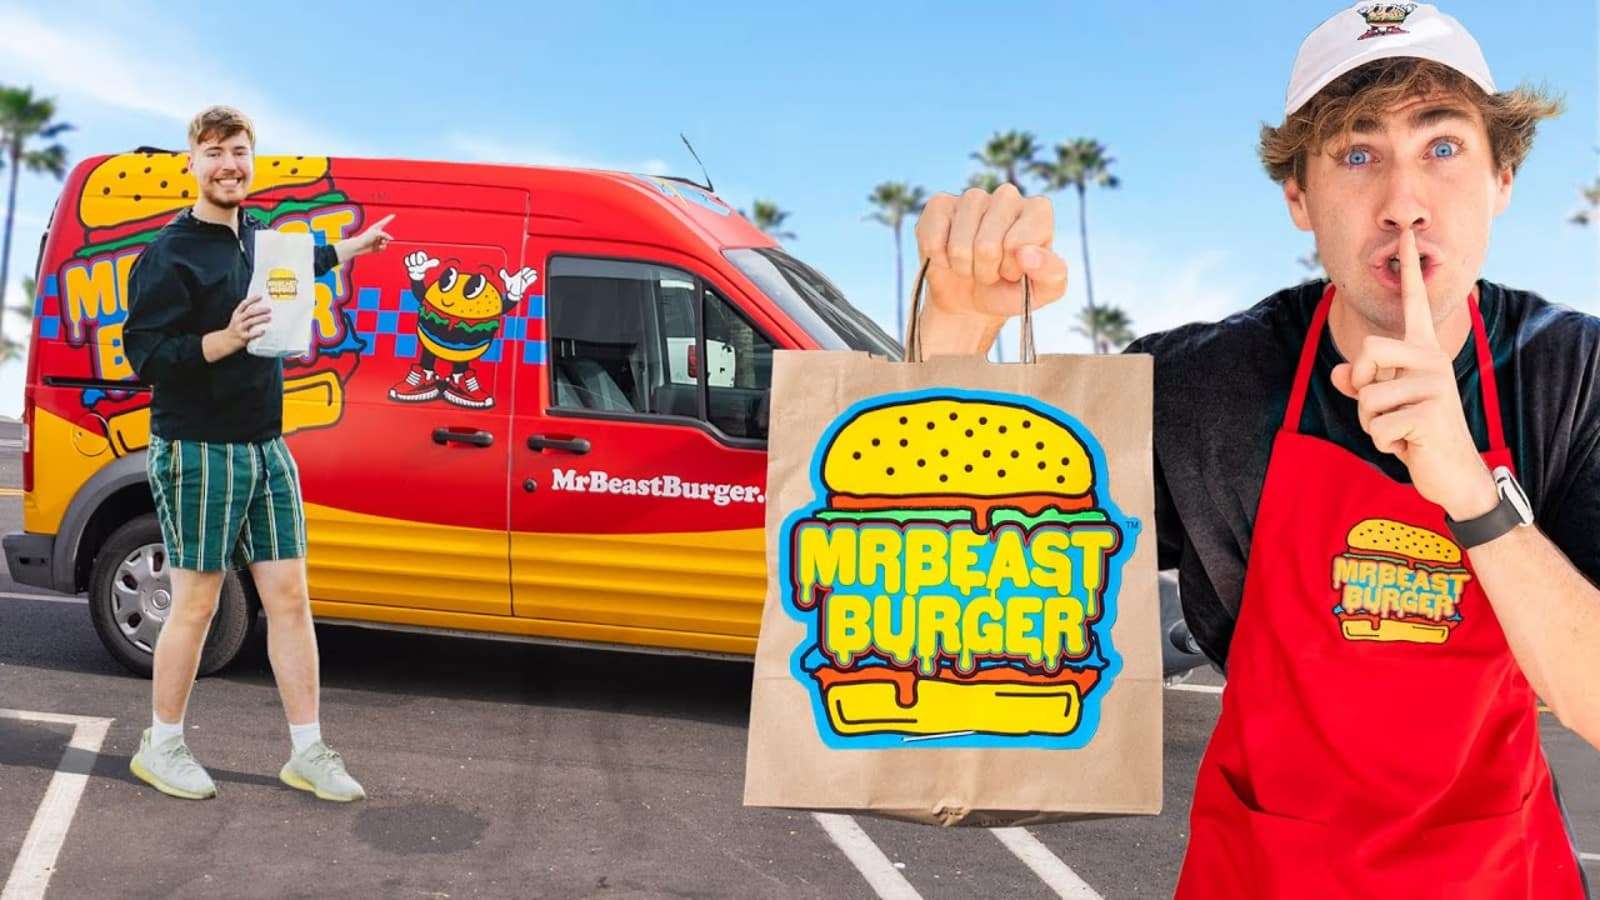 Airrack takes over a mrbeast burger